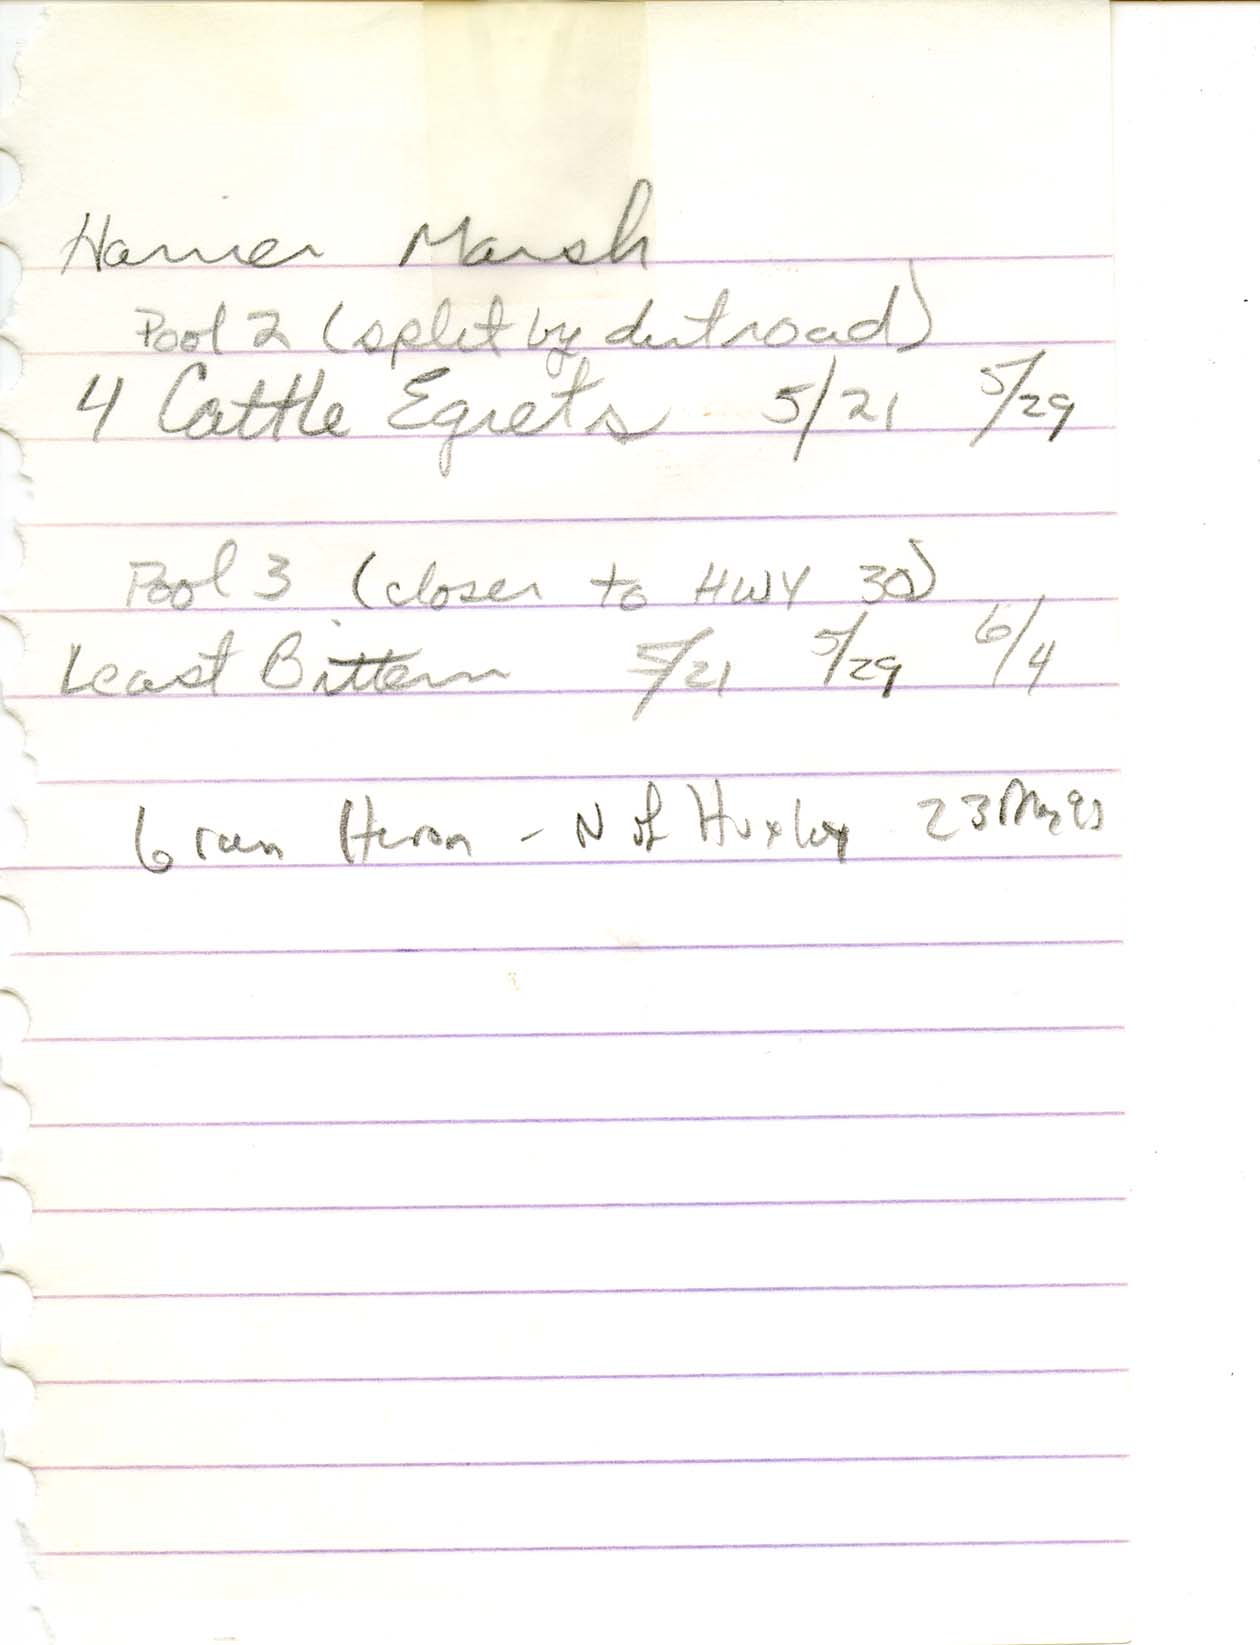 Field notes contributed by an unknown birdwatcher, spring 1997